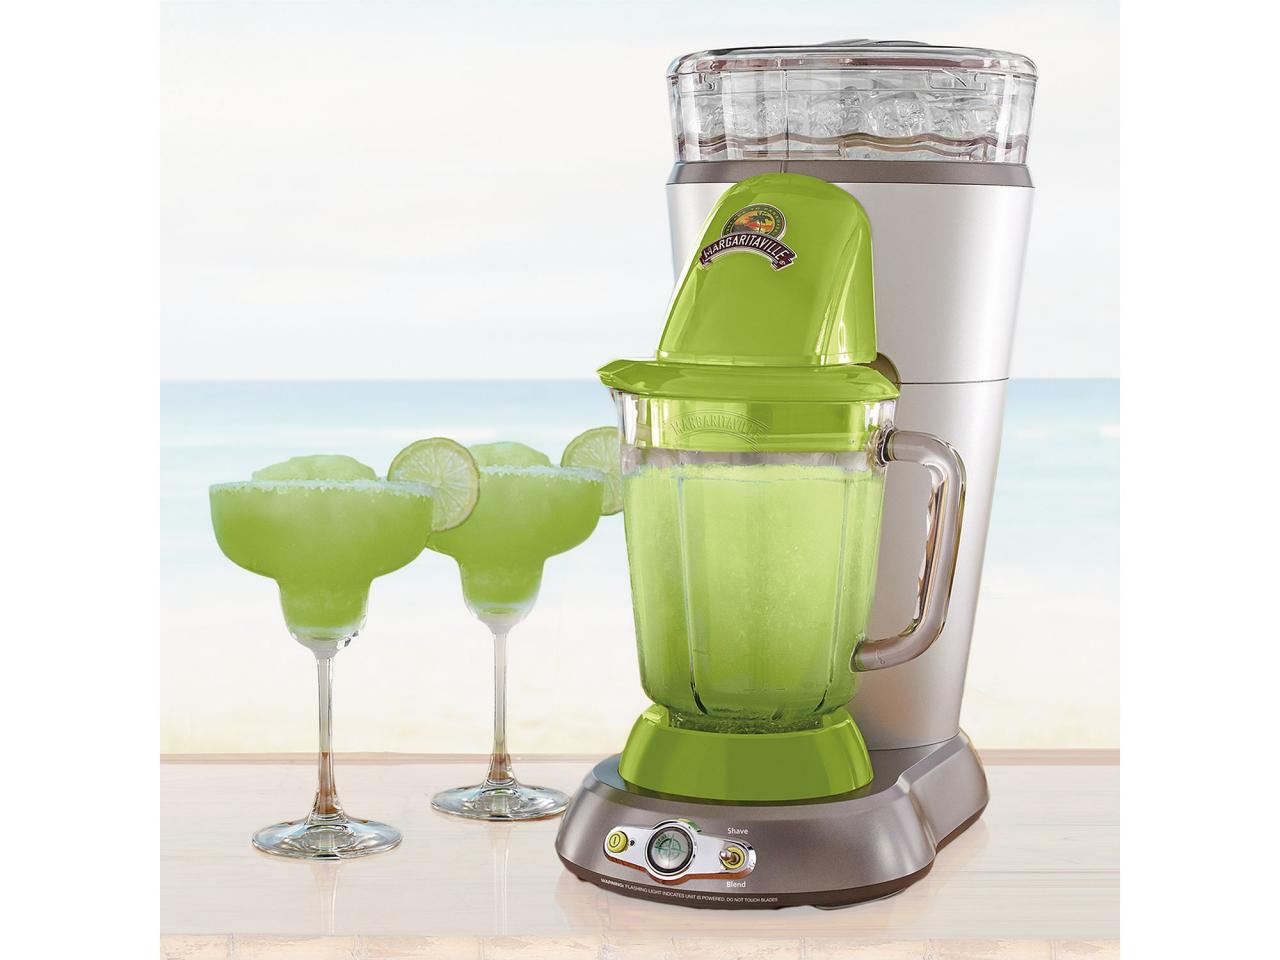 Great Frozen Drink Maker and Margarita Machine for Home - 32-Ounce